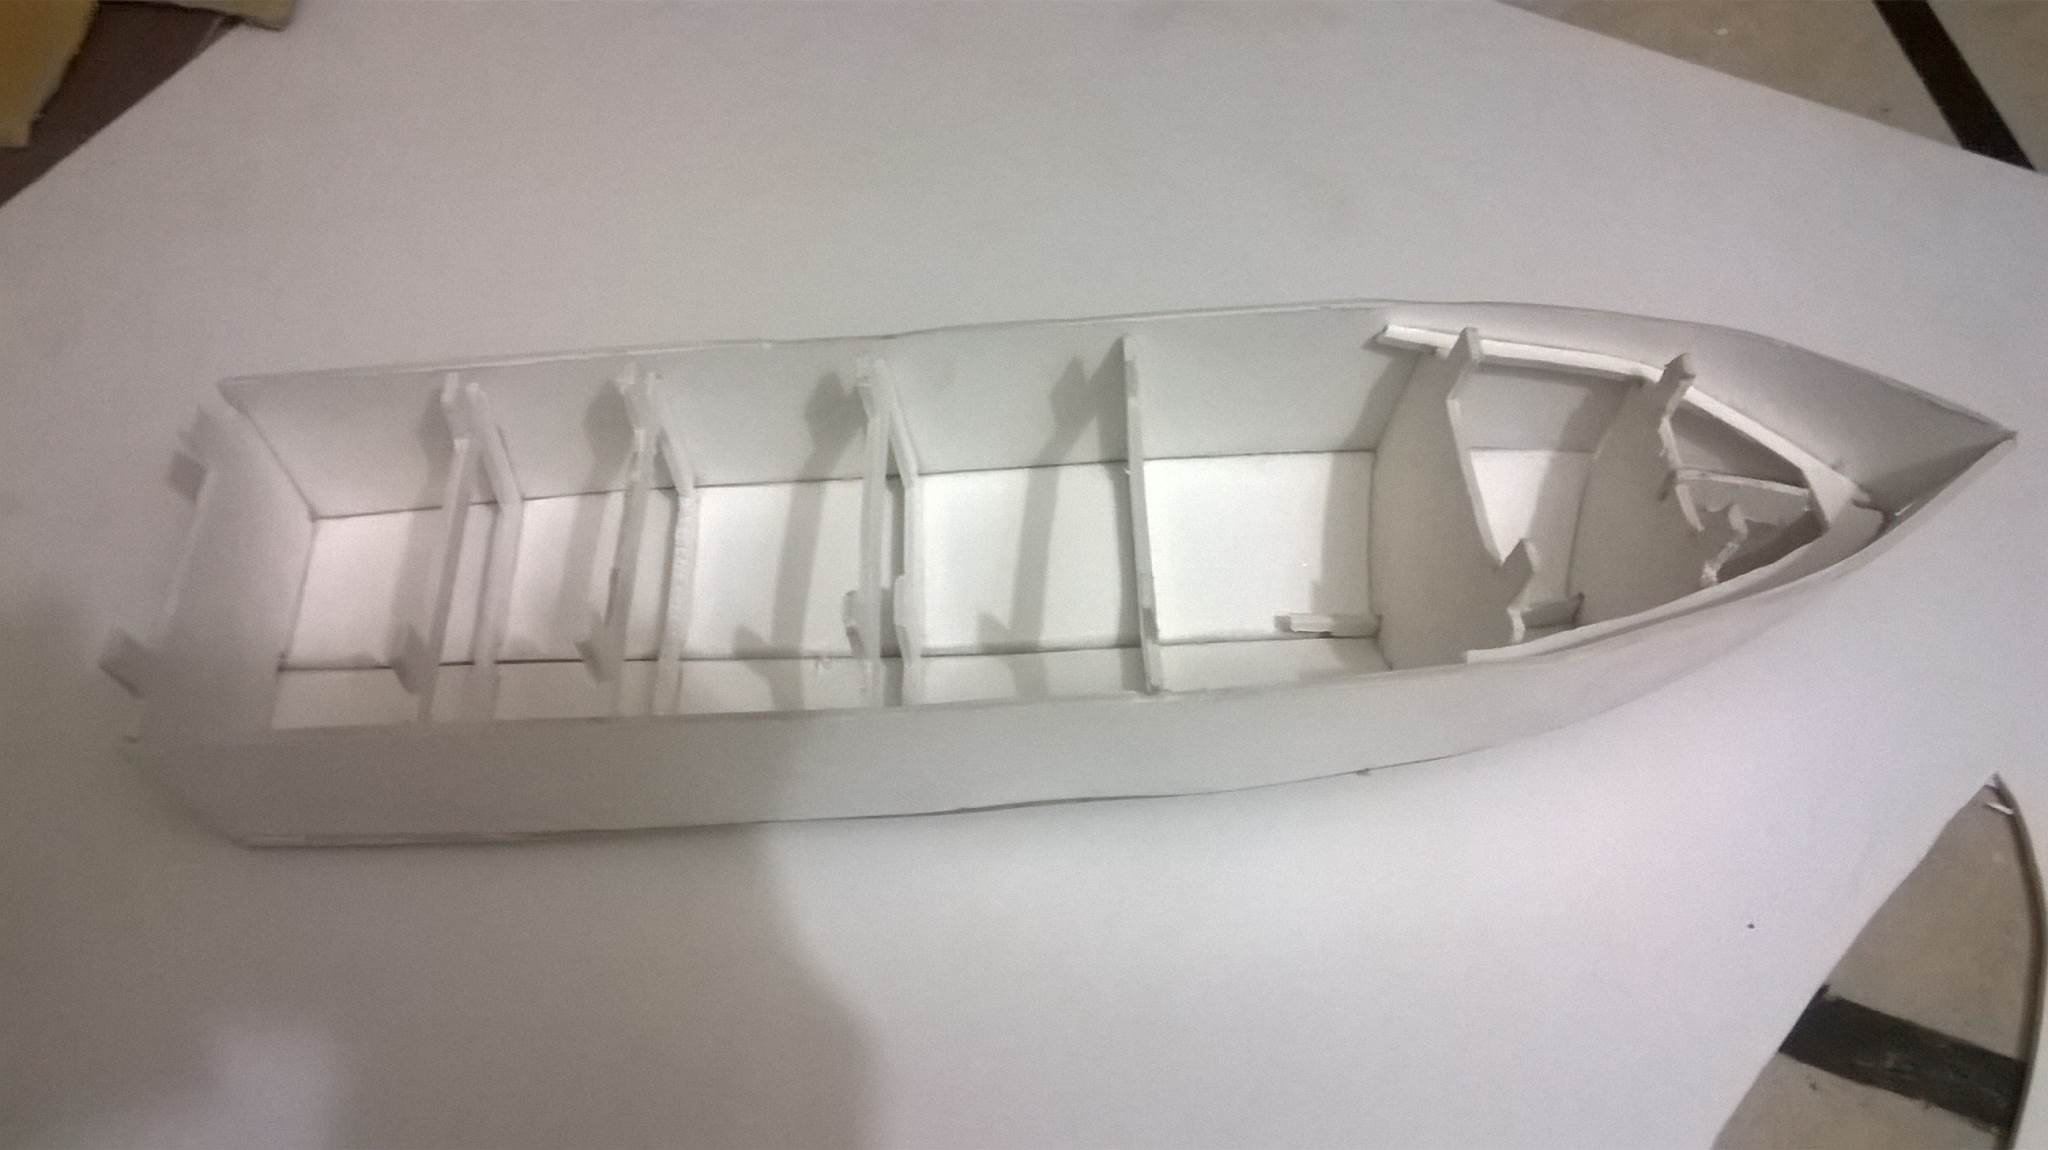 Joining Parts to Make a Remote Control Boat using PVC Sheet